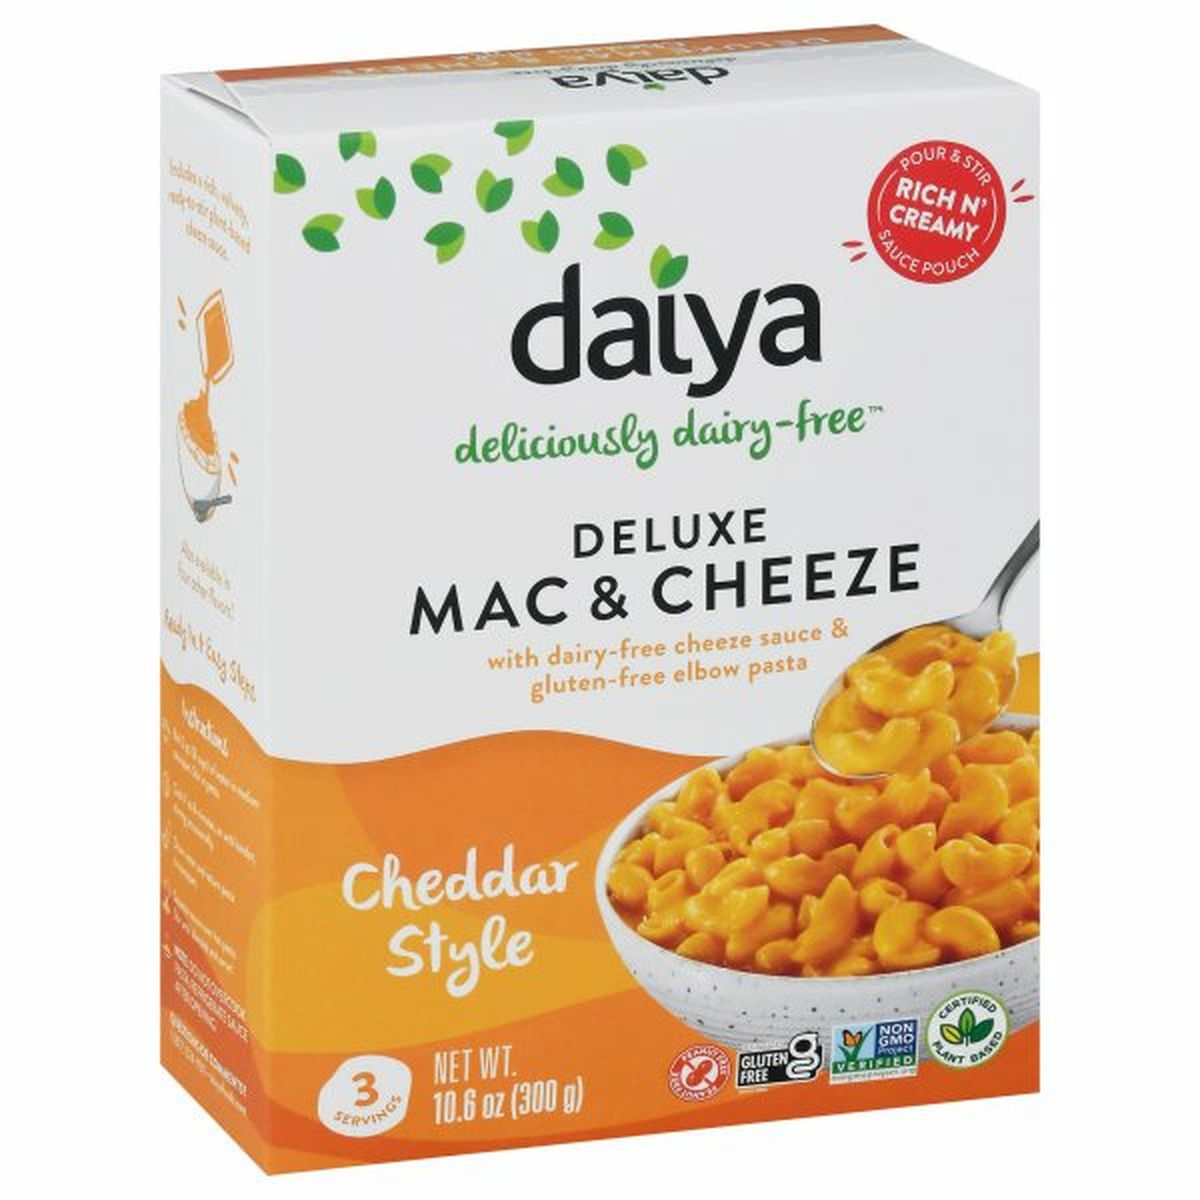 Calories in Daiya Mac & Cheeze, Deluxe, Cheddar Style